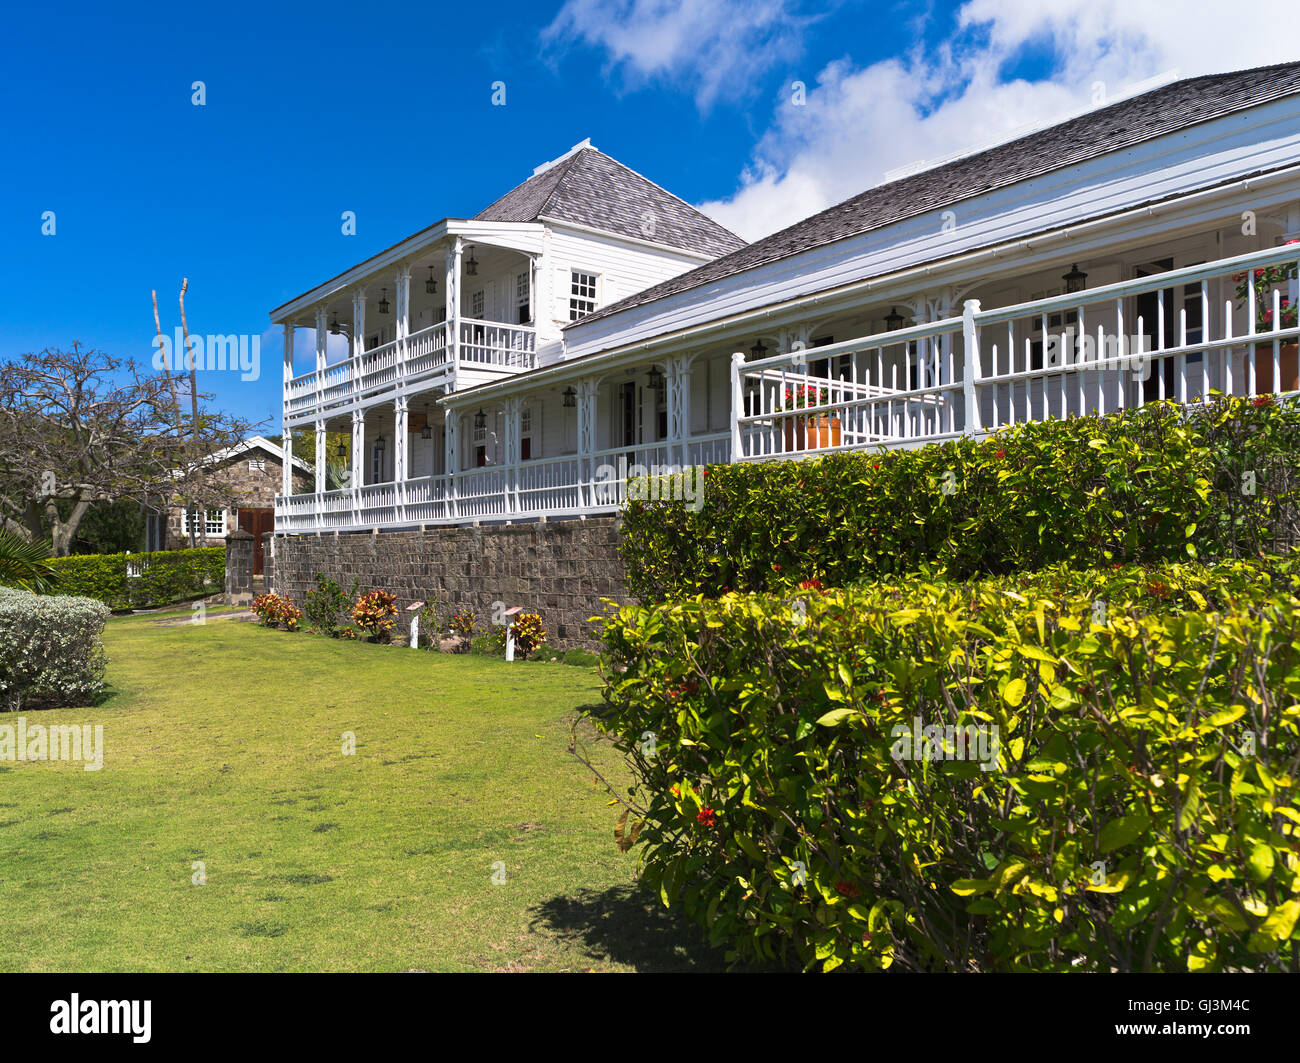 dh Fairview Great House ST KITTS CARIBBEAN Old colonial house museum Nelsons garden exterior gardens nobody home Stock Photo